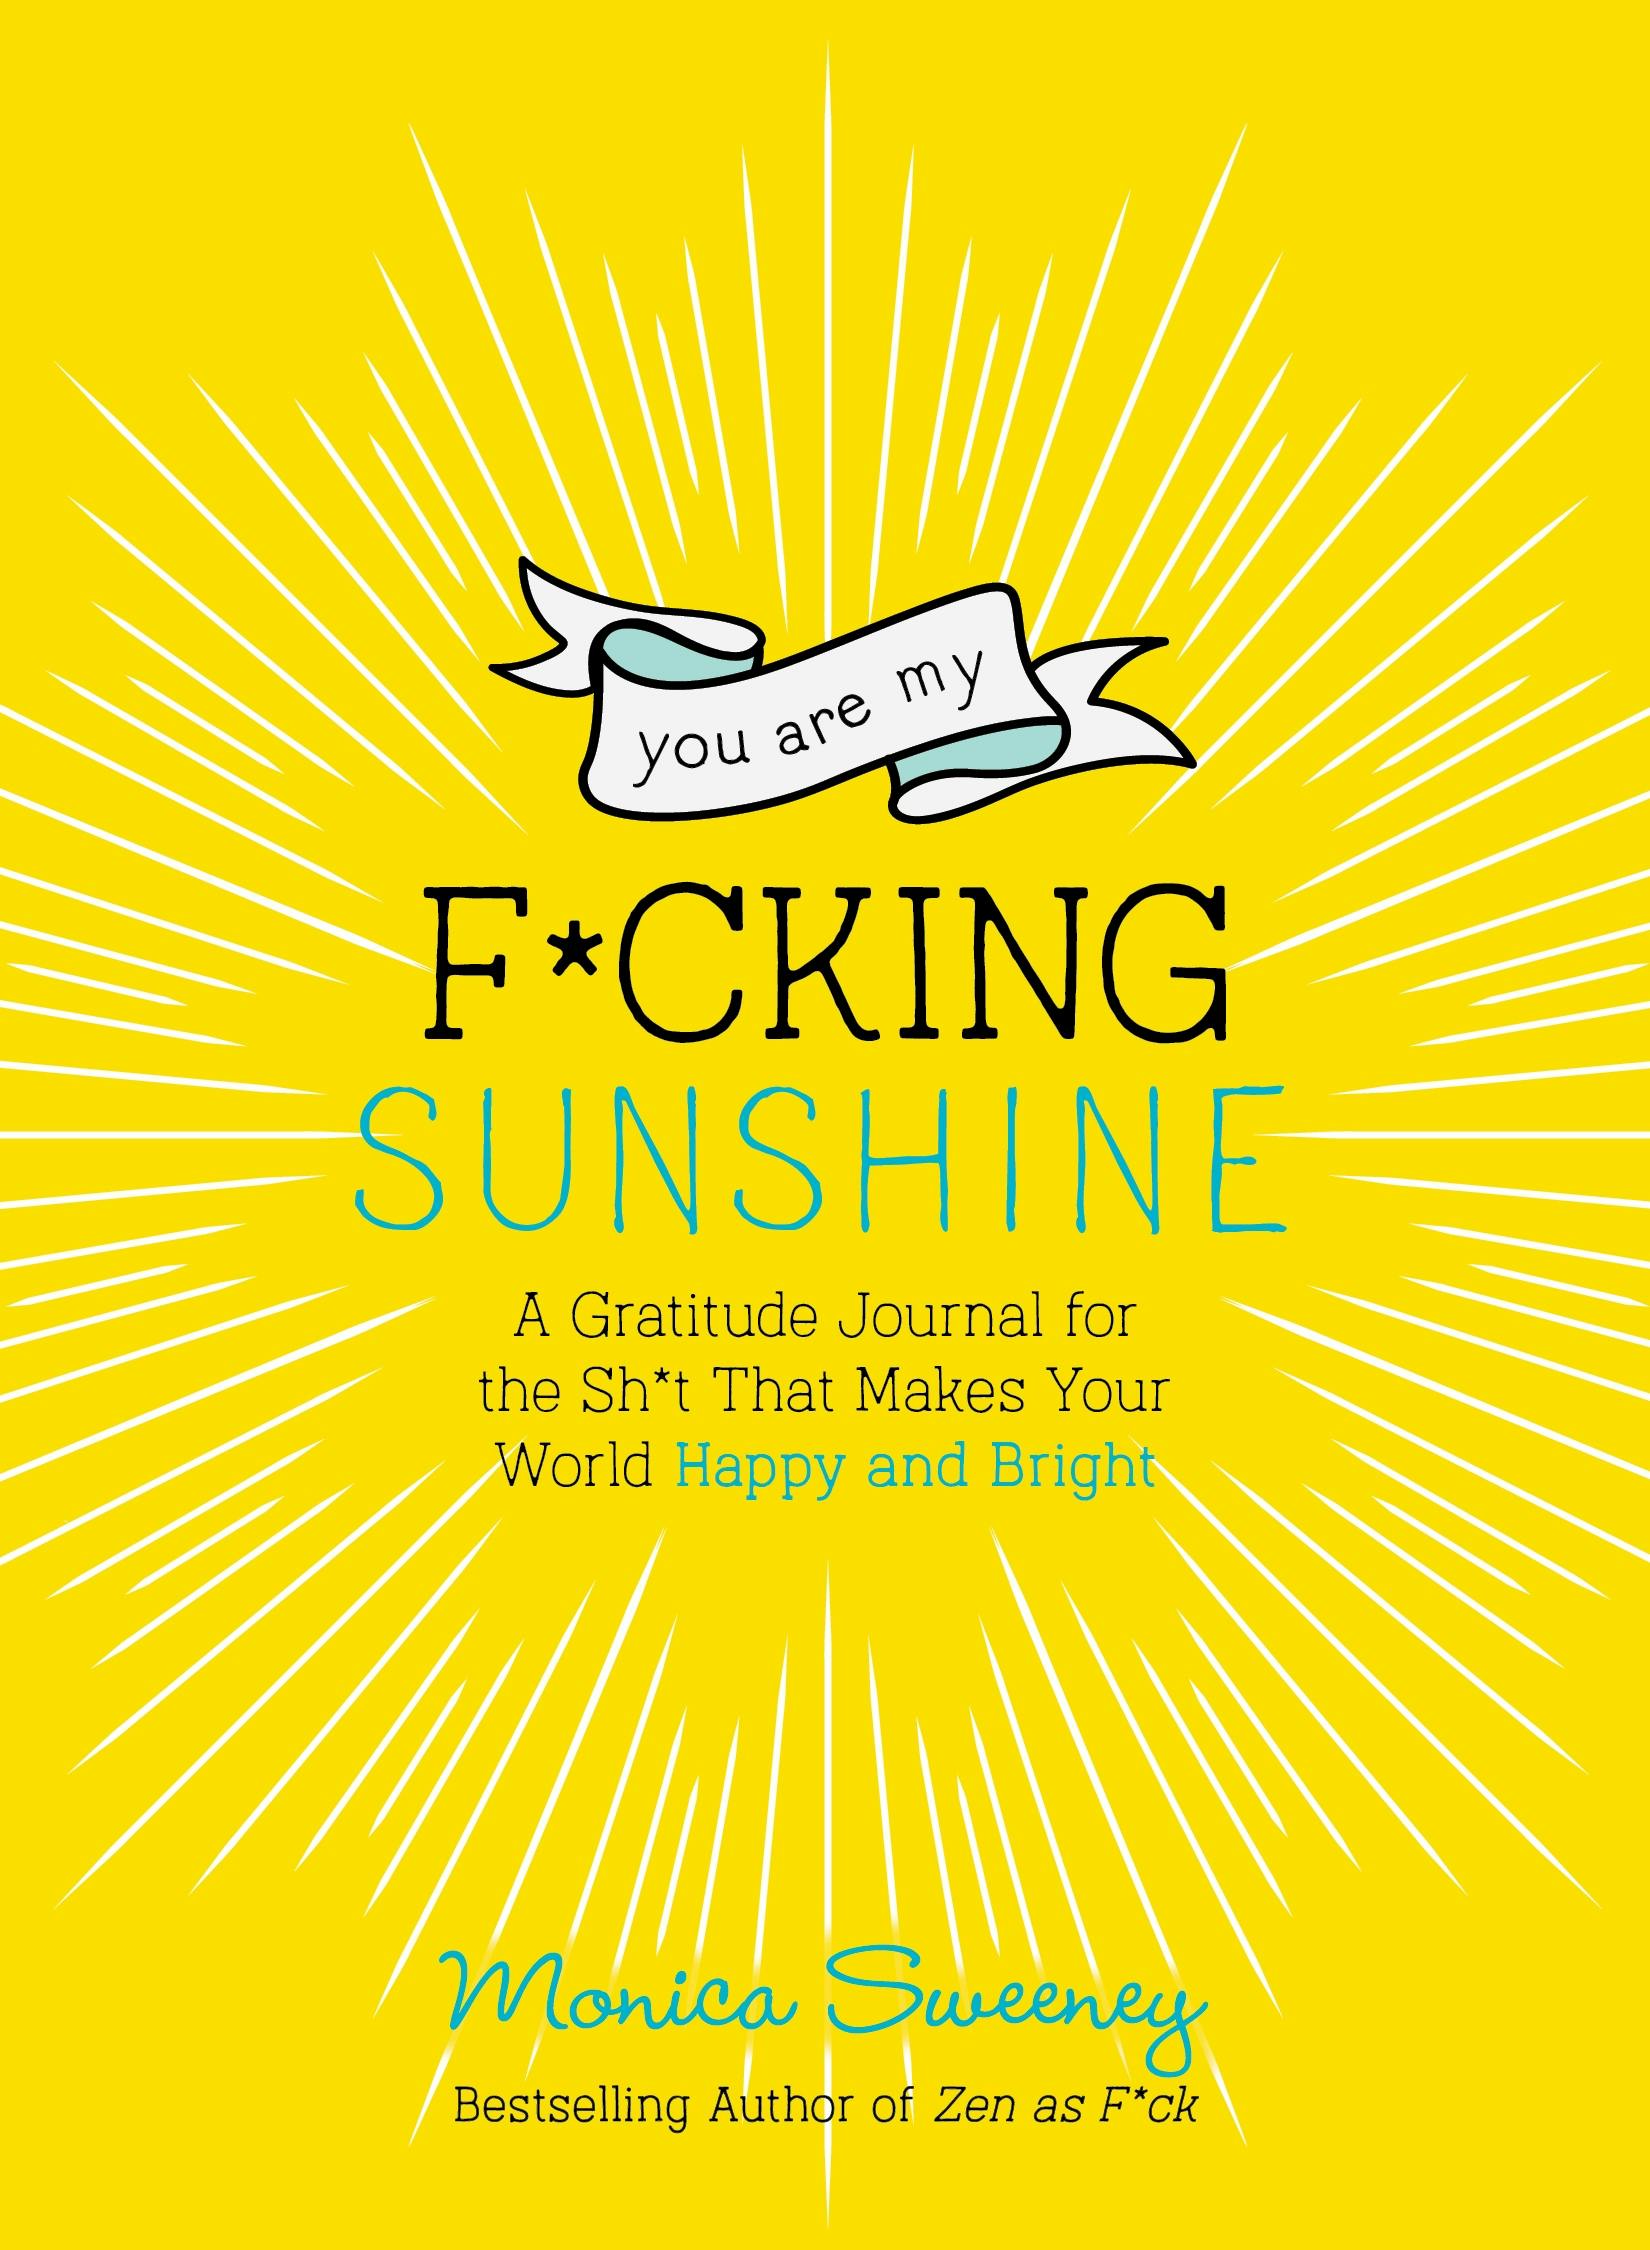 You are My Sunshine [Book]